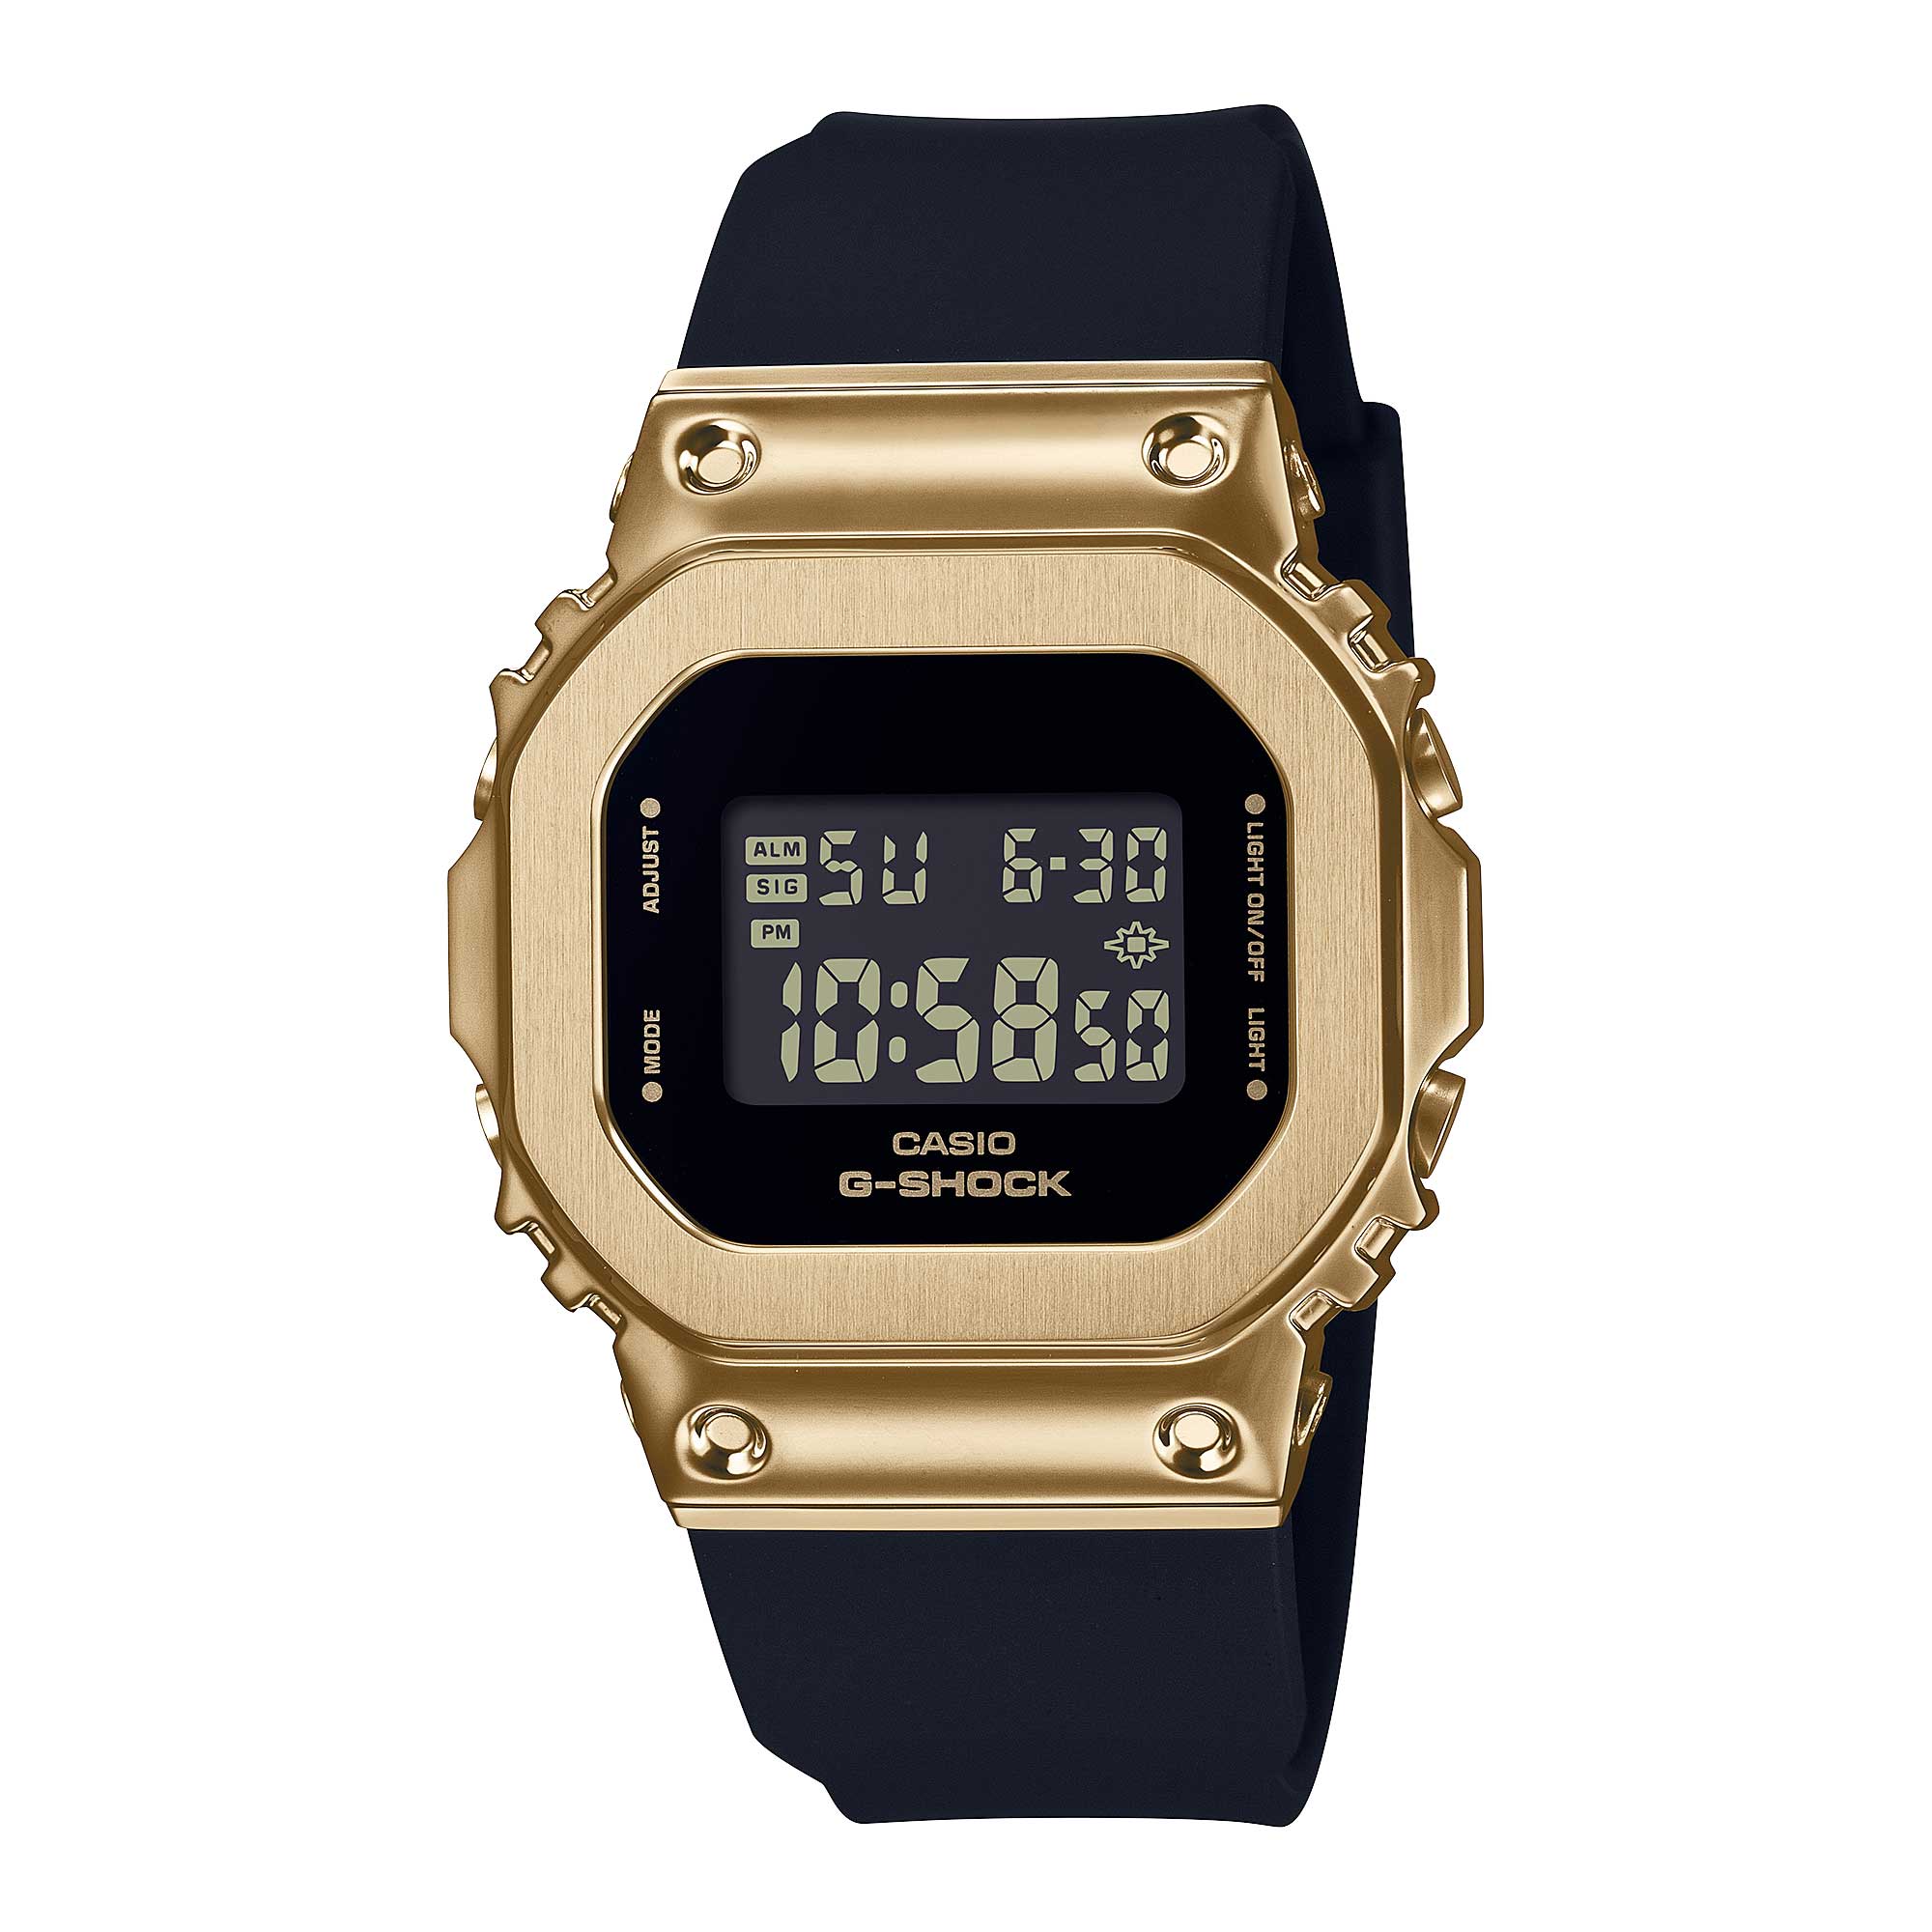 Casio G-Shock for Ladies' Metal-Clad Black Resin Band Watch GMS5600GB-1D GM-S5600GB-1D GM-S5600GB-1 Watchspree